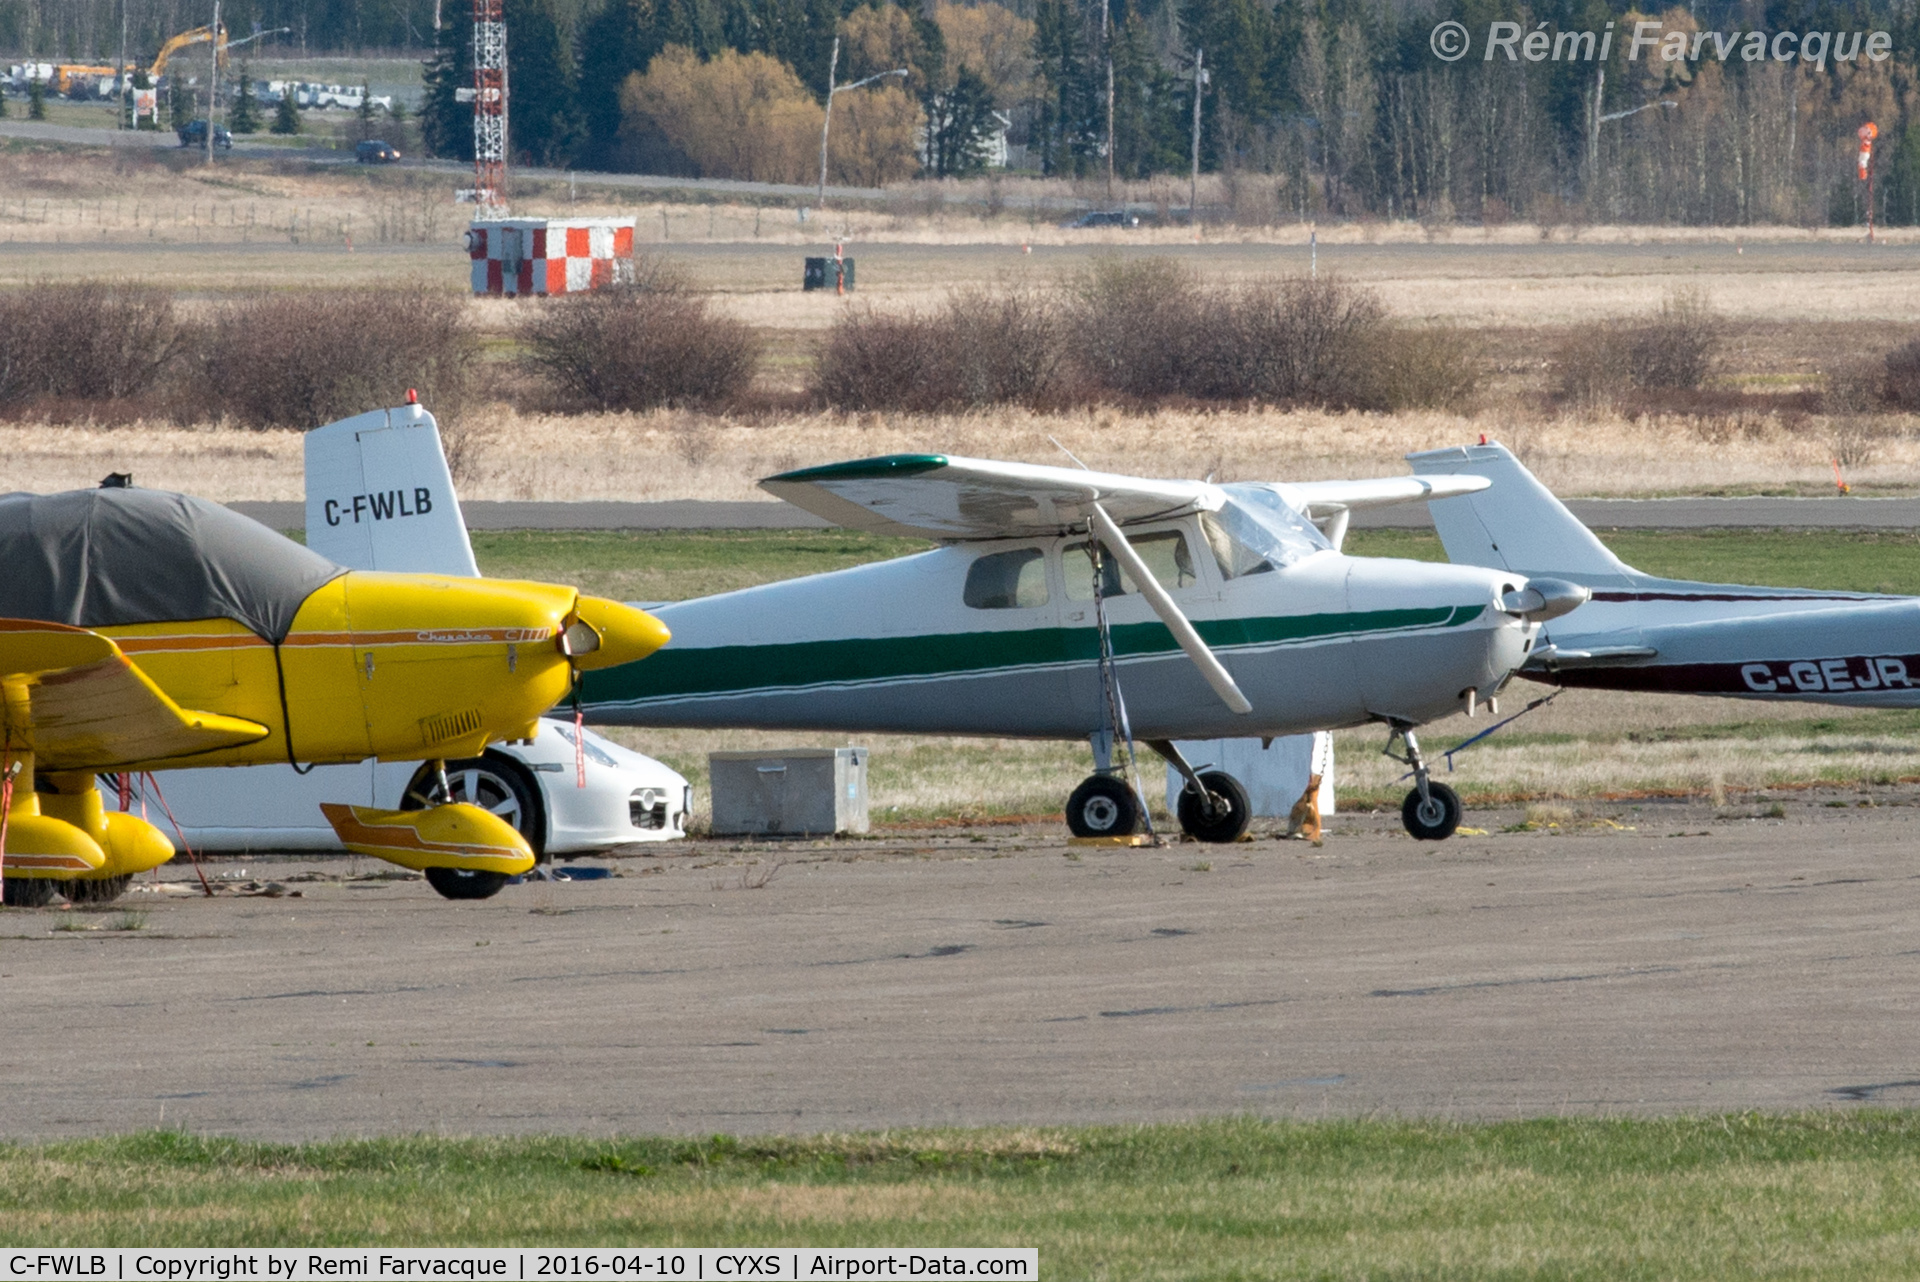 C-FWLB, 1957 Cessna 172 C/N 29594, Parked south of main terminal